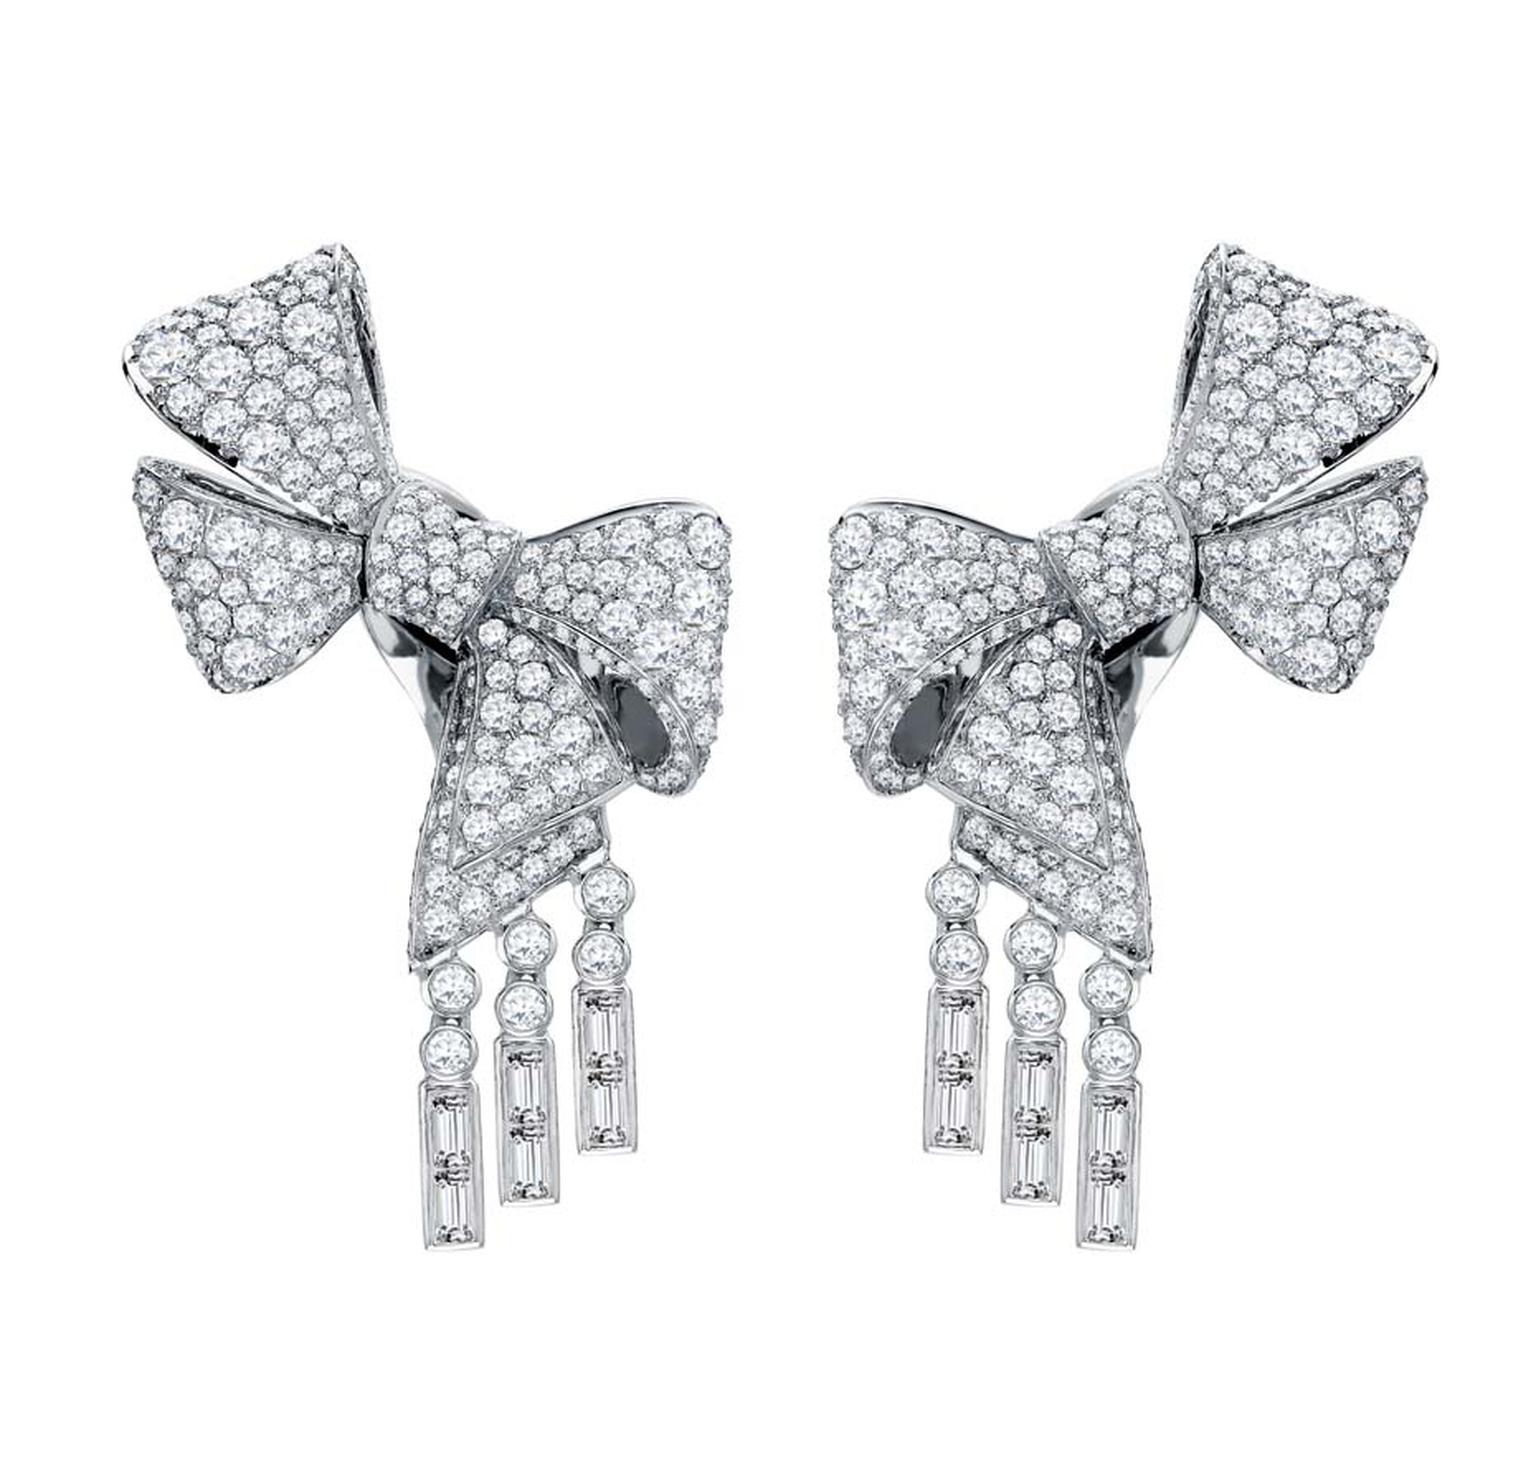 Garrard white gold ear climbers set with round and baguette cut diamonds, from the new Bow Collection.